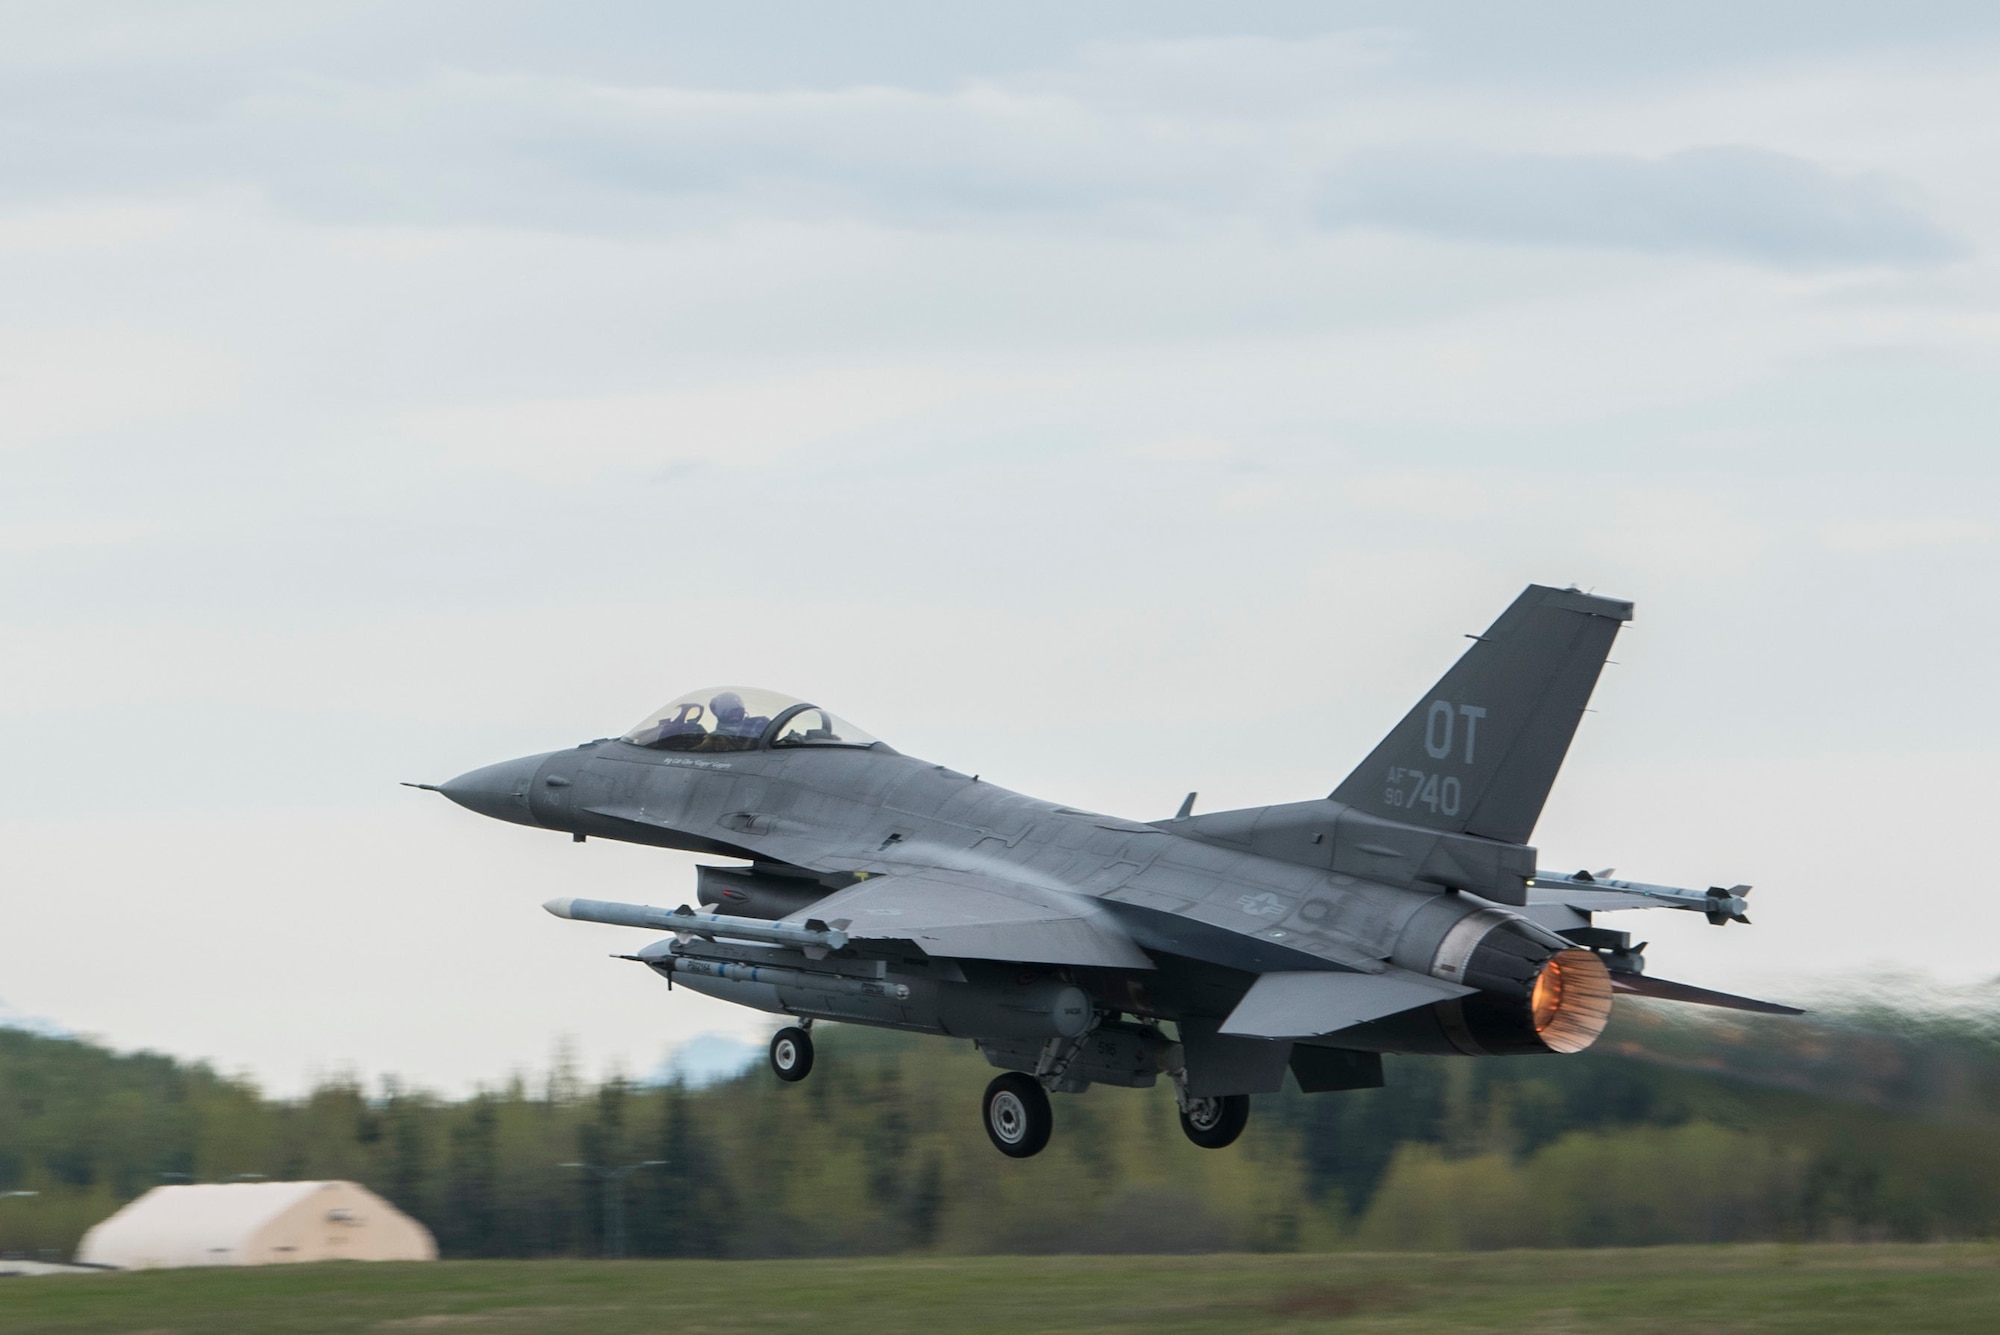 A U.S. Air Force F-16 Fighting Falcon, assigned with Eglin Air Force Base, Fla., takes off during Exercise Northern Edge, May 14, 2019, Joint Base Elmendorf-Richardson, Alaska. More than 25 units and 10,000 personnel with approximately 200 aircraft and five naval ships are participating in the exercise. Northern Edge showcases the lethality of joint forces and the capabilities of U.S. forces in and around the Indo-Pacific region. (U.S. Air Force photo by Airman 1st Class Caitlin Russell)